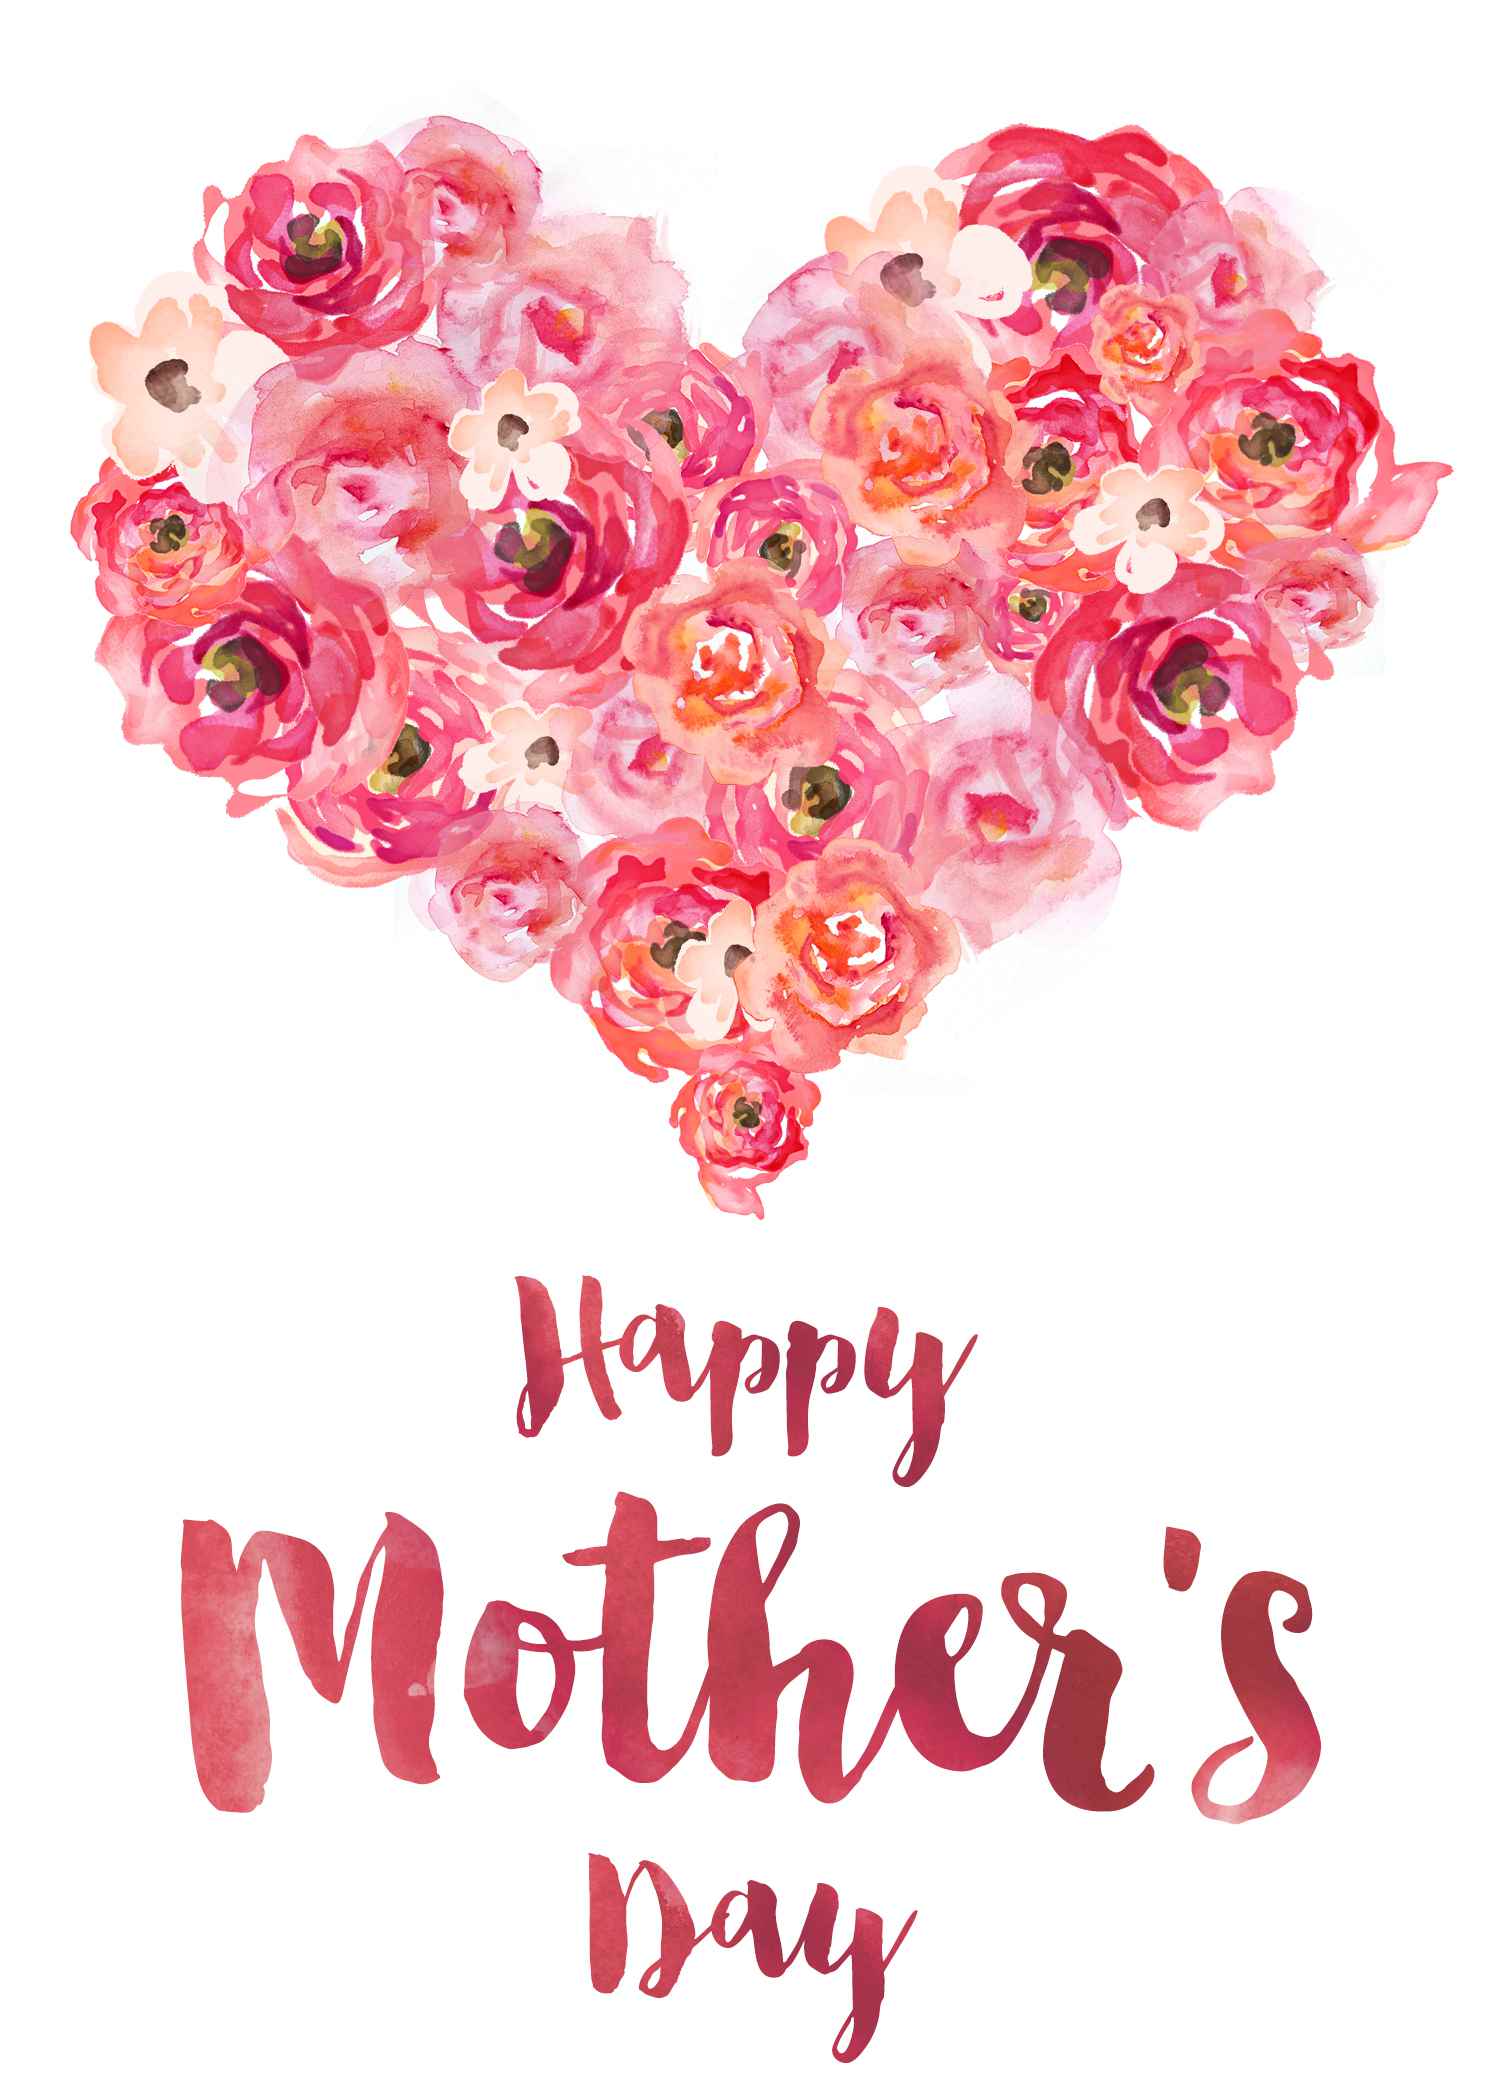 A Mother's Day card with a heart made of roses on it